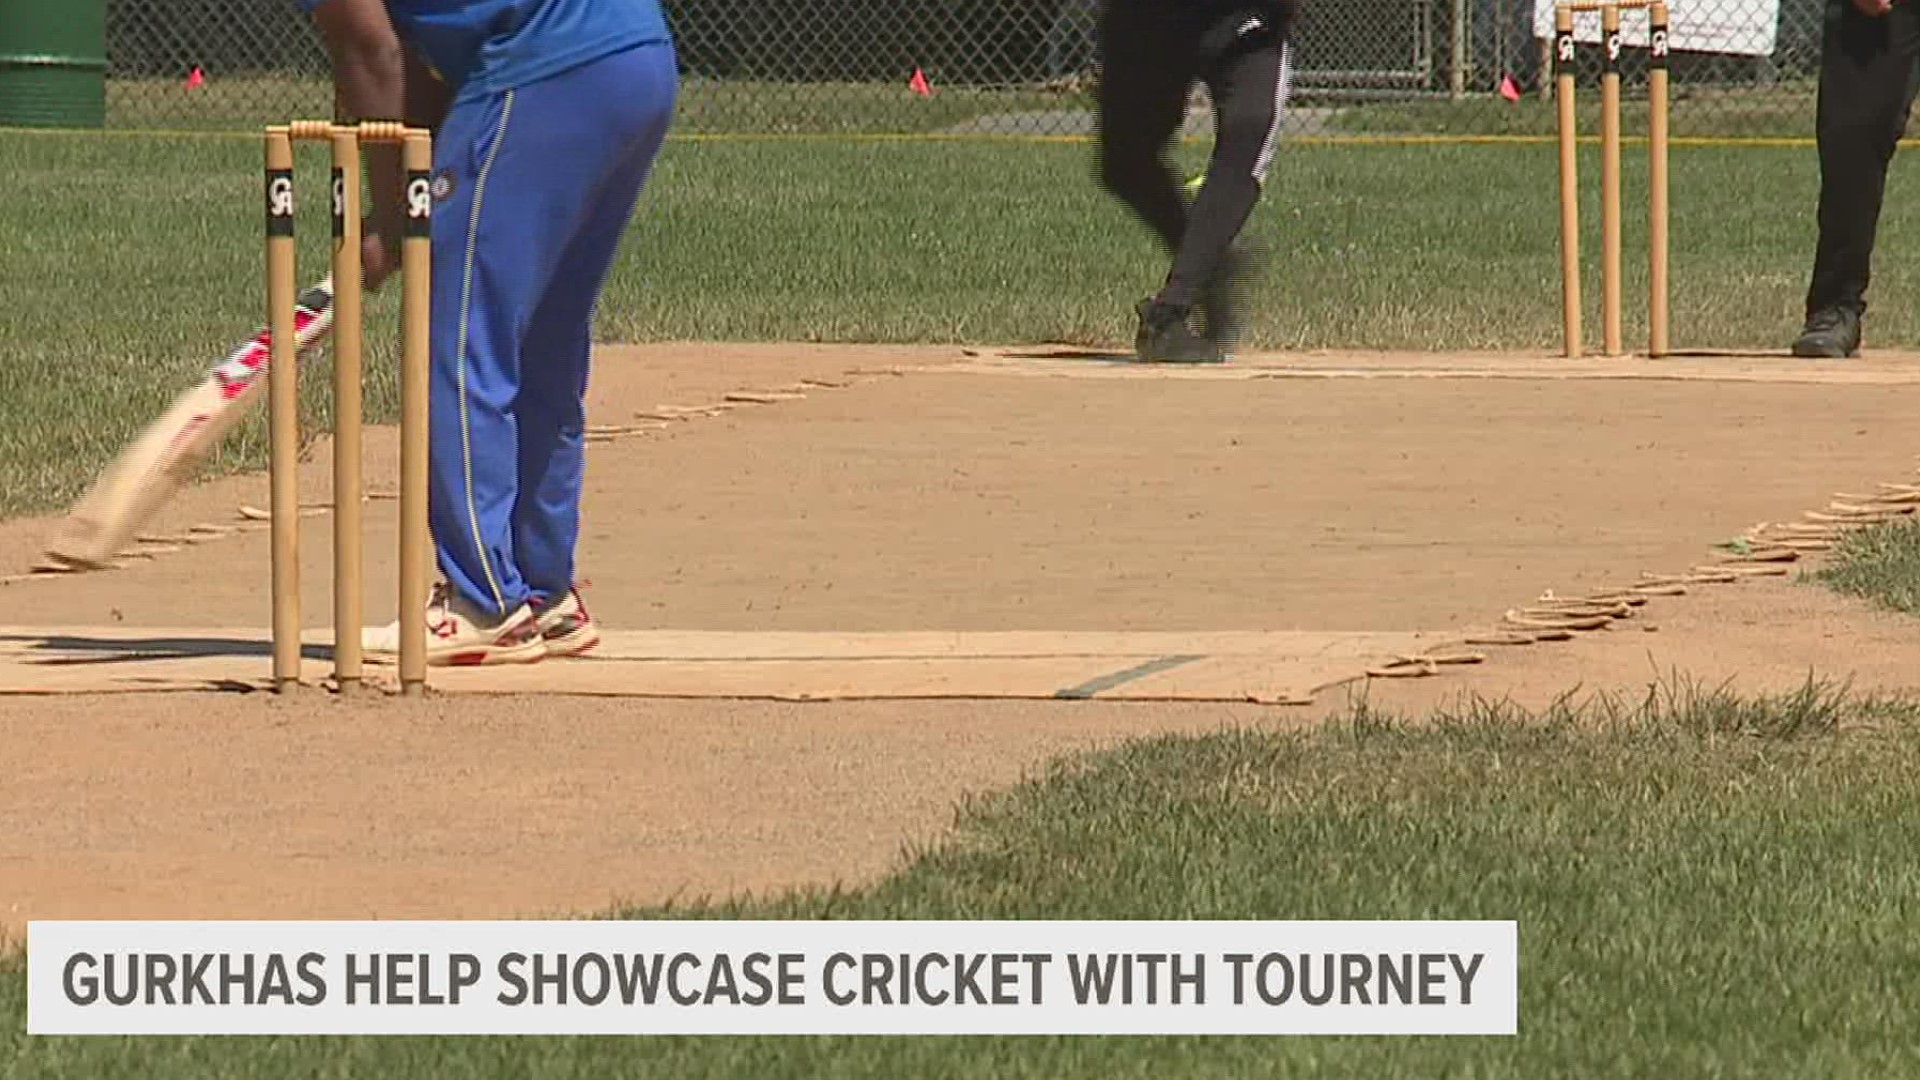 Players and teams came from across the country to compete in the 8th Annual Interstate Cricket Tournament.